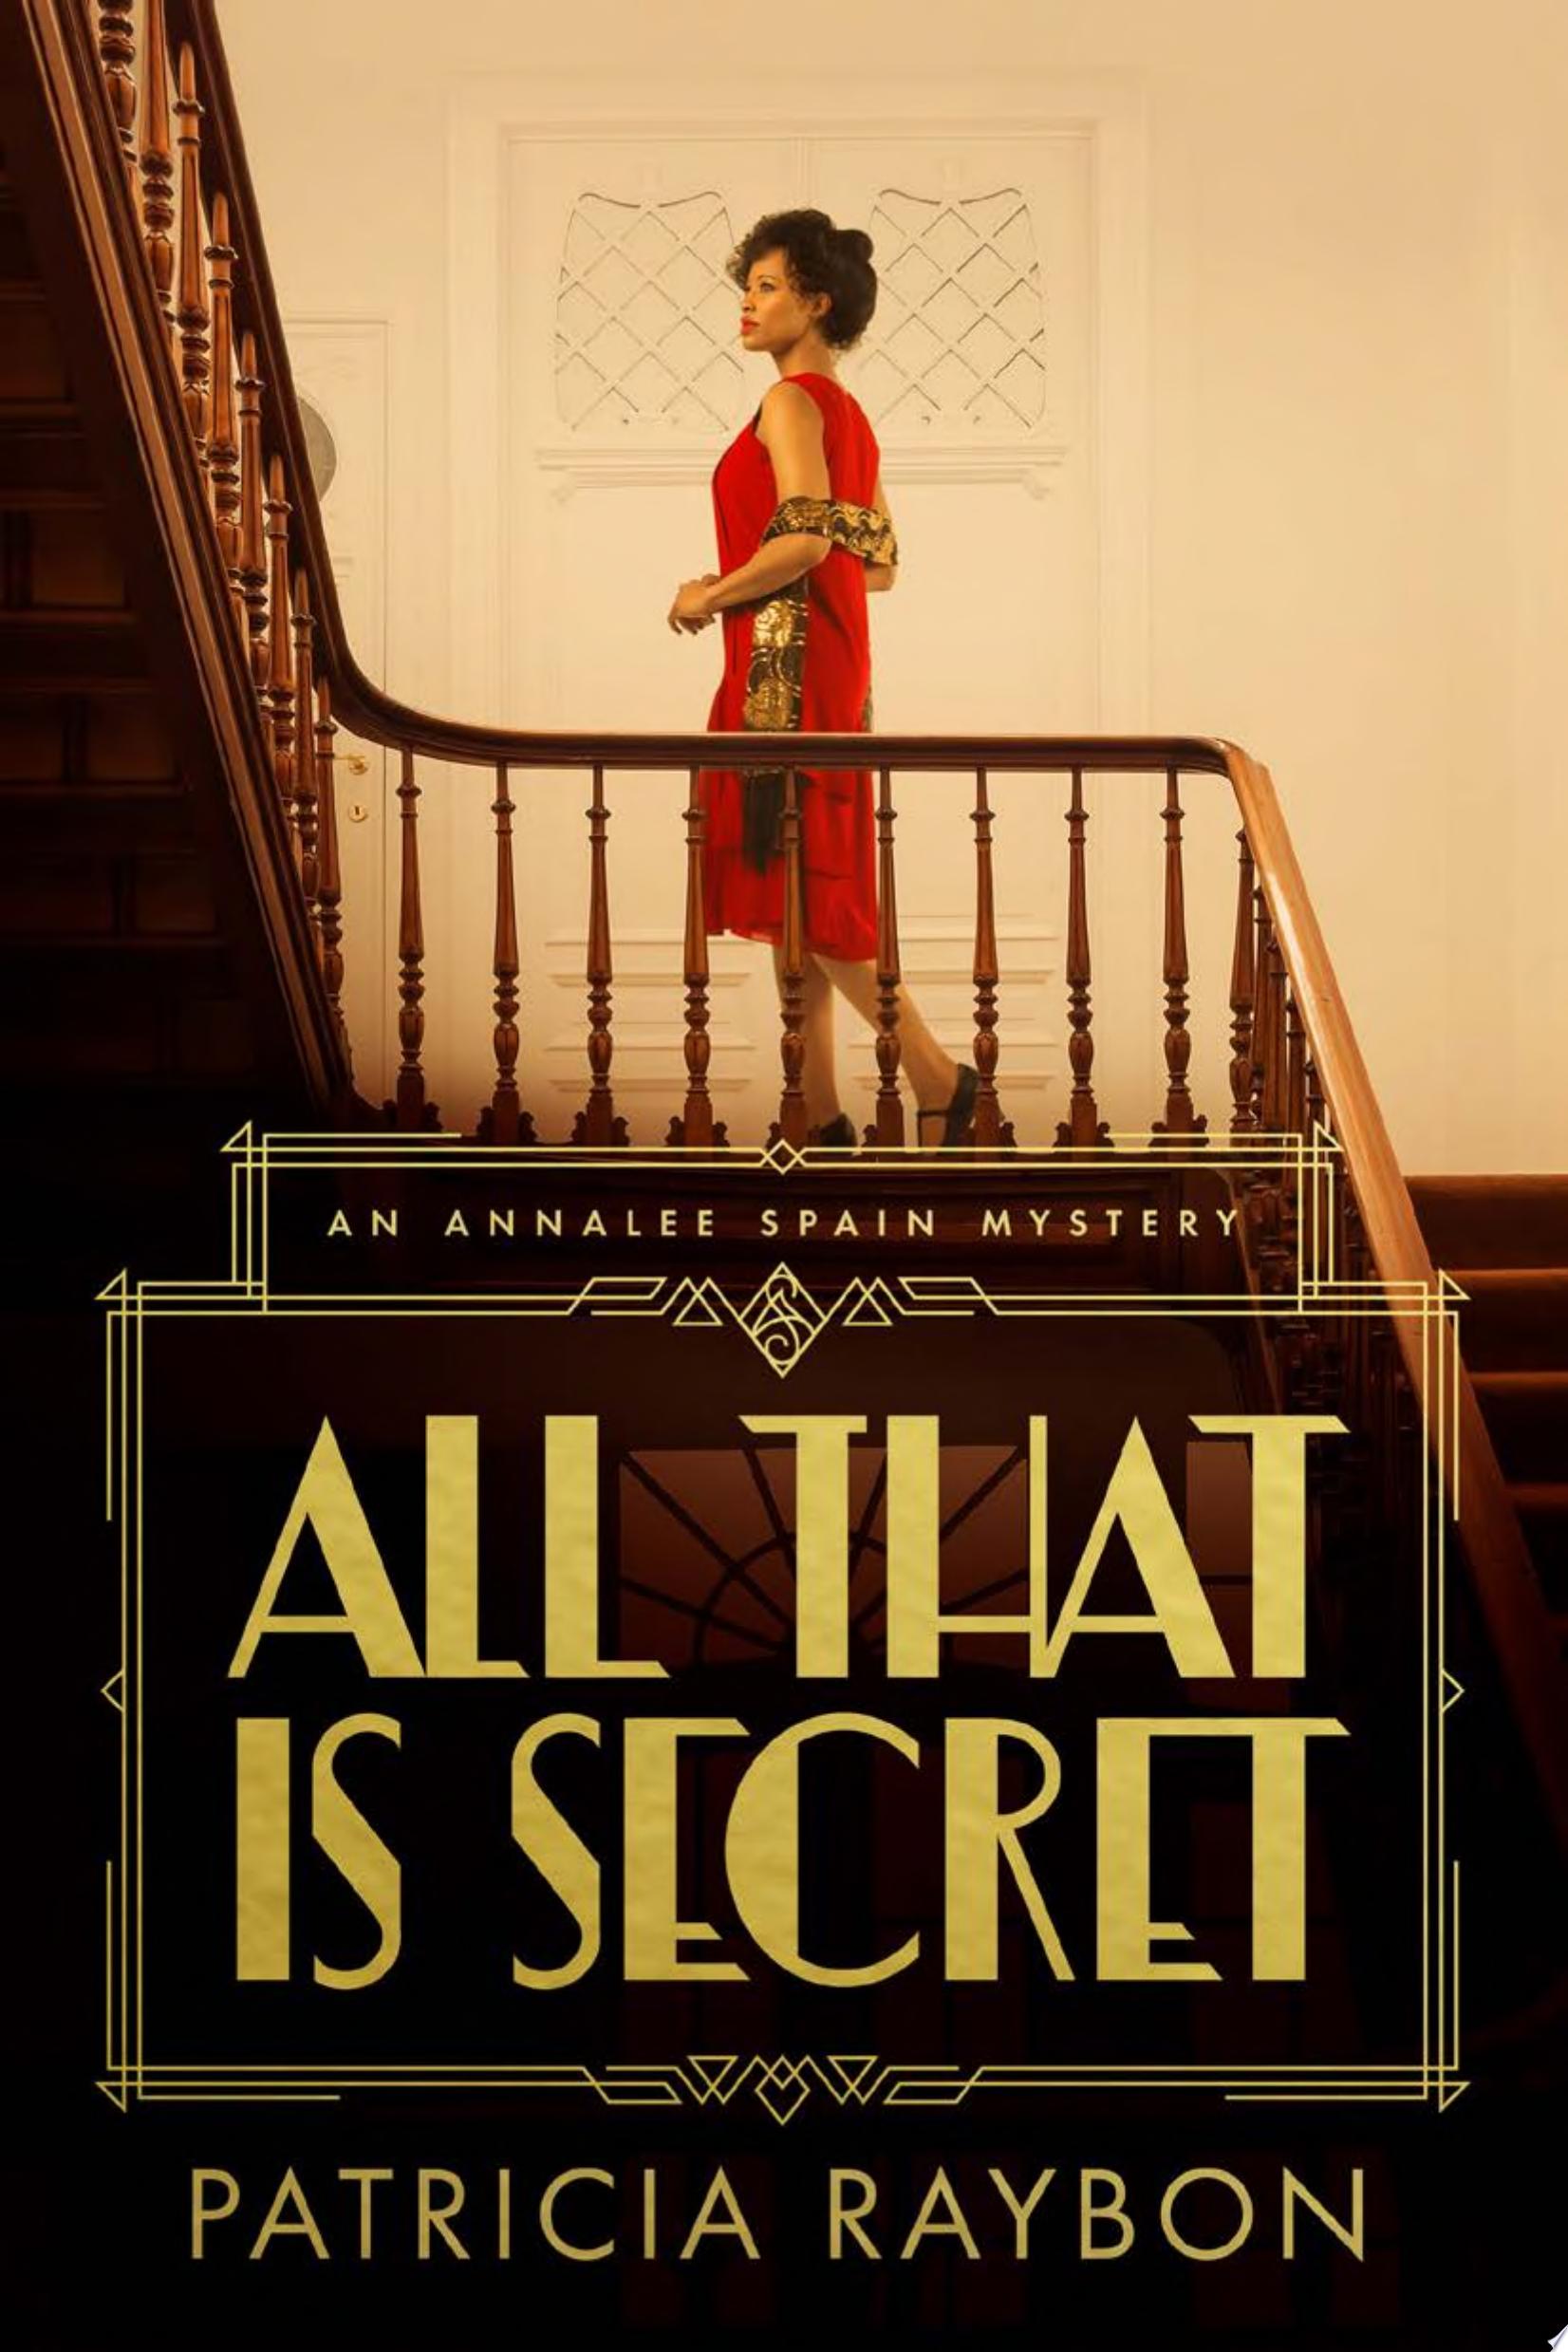 Image for "All That Is Secret"